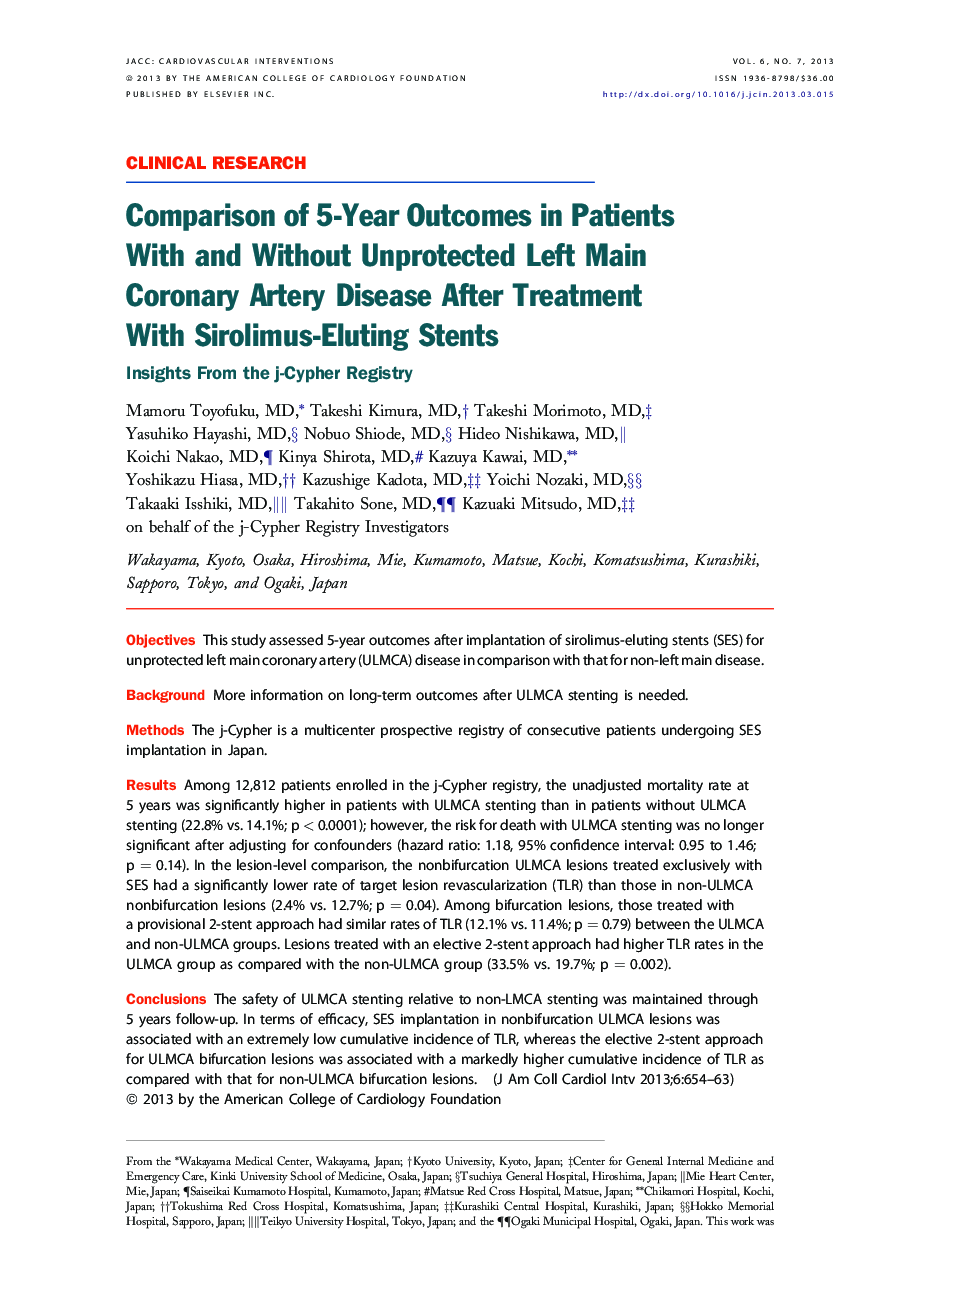 Comparison of 5-Year Outcomes in Patients With and Without Unprotected Left Main Coronary Artery Disease After Treatment With Sirolimus-Eluting Stents : Insights From the j-Cypher Registry